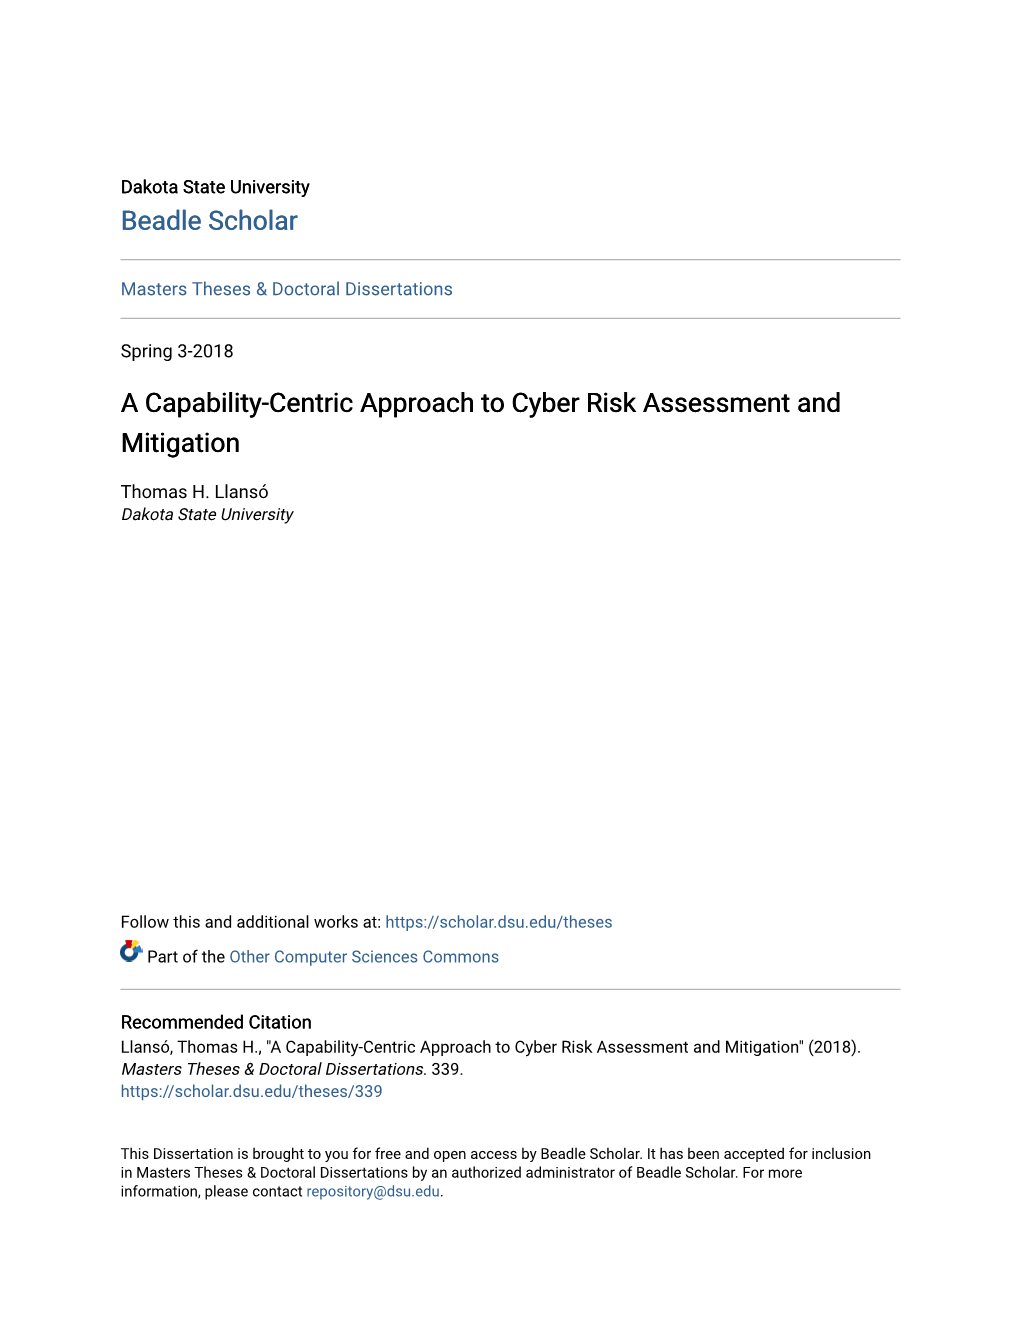 A Capability-Centric Approach to Cyber Risk Assessment and Mitigation